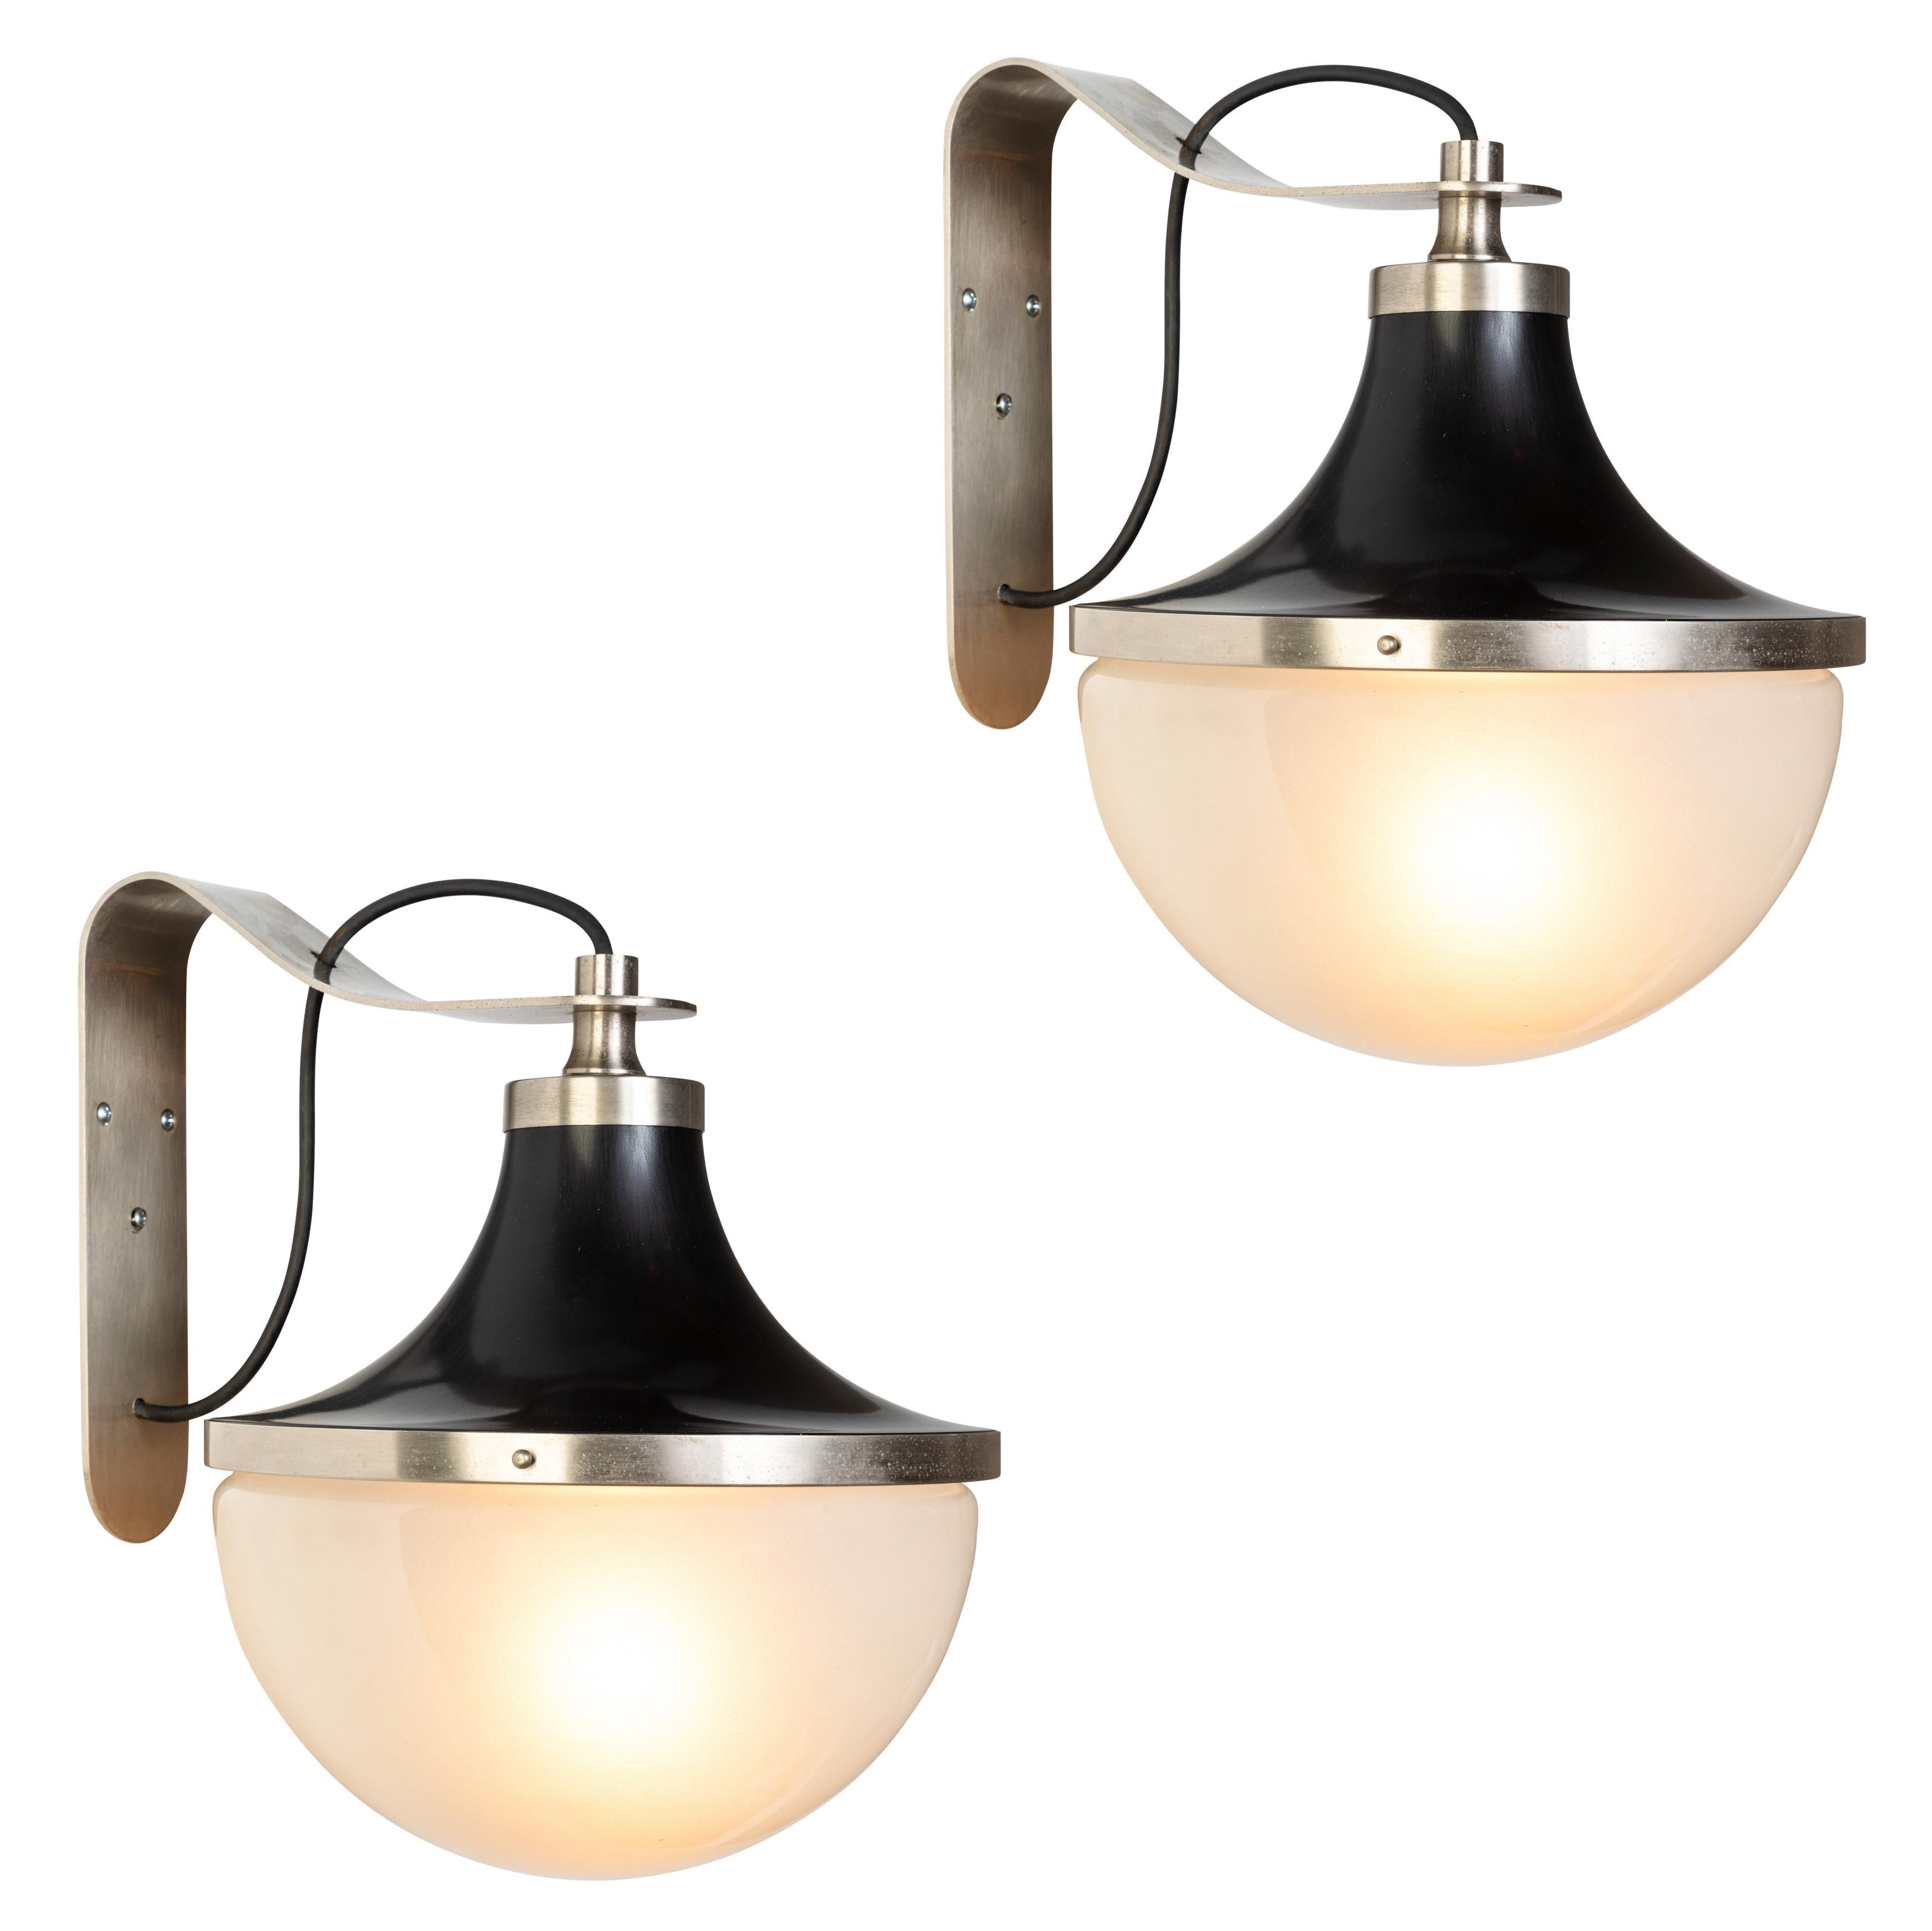 1960s Sergio Mazza 'Pi' wall lights for Artemide. Executed in nickeled brass, black painted metal and Opaline glass. Architectural and incomparable, these sconces emit a pleasingly filtered light through its beautiful glass shade.

Price is per